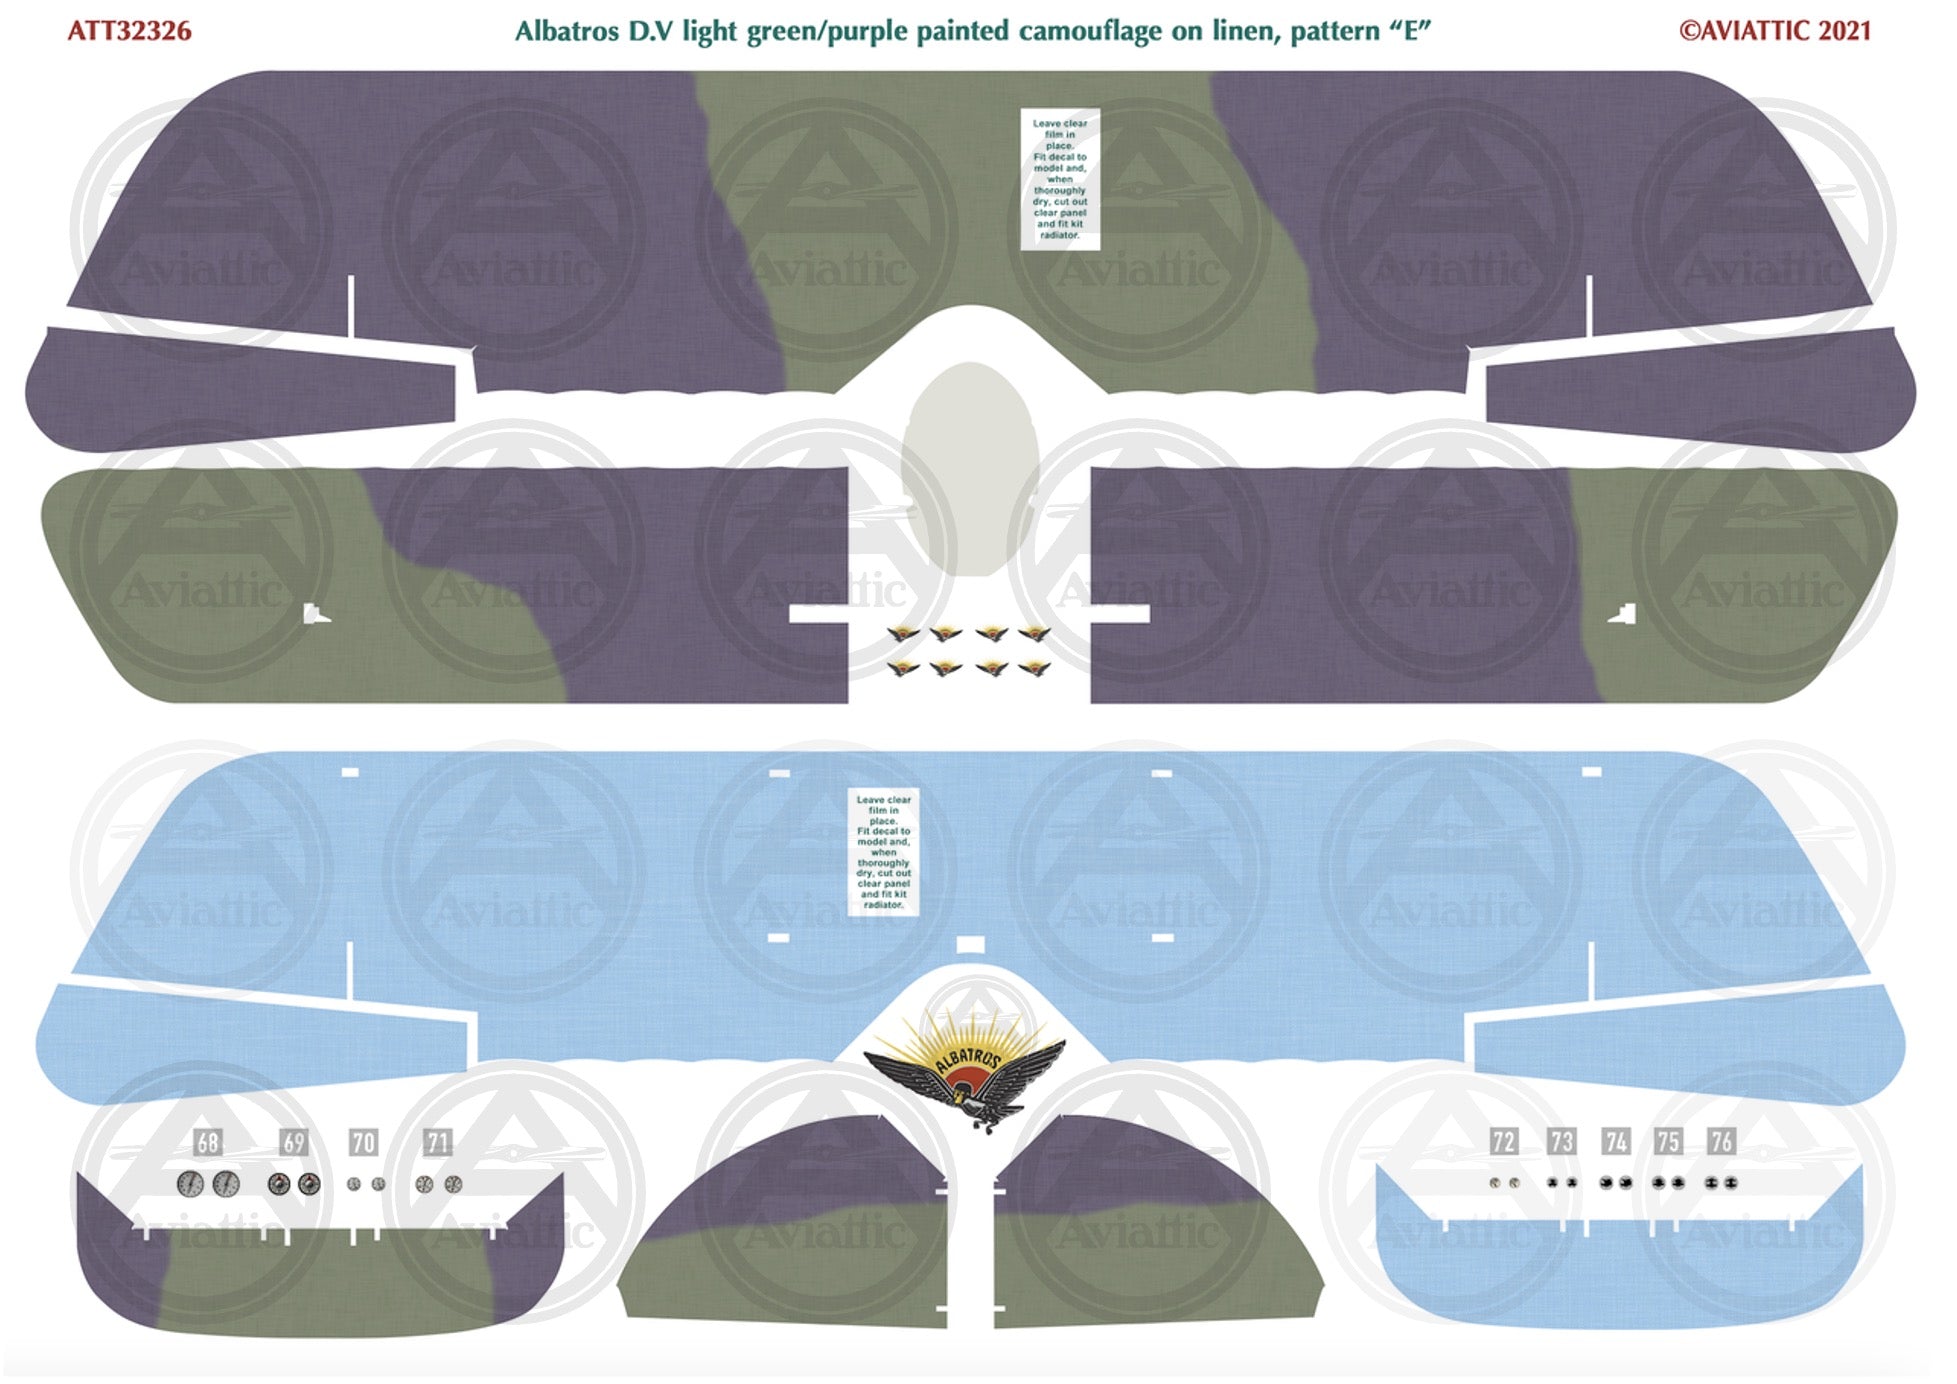 1/32 - Wingnut Wings - Albatros D.V(a) - Painted Camouflage on Linen - scheme E - faded